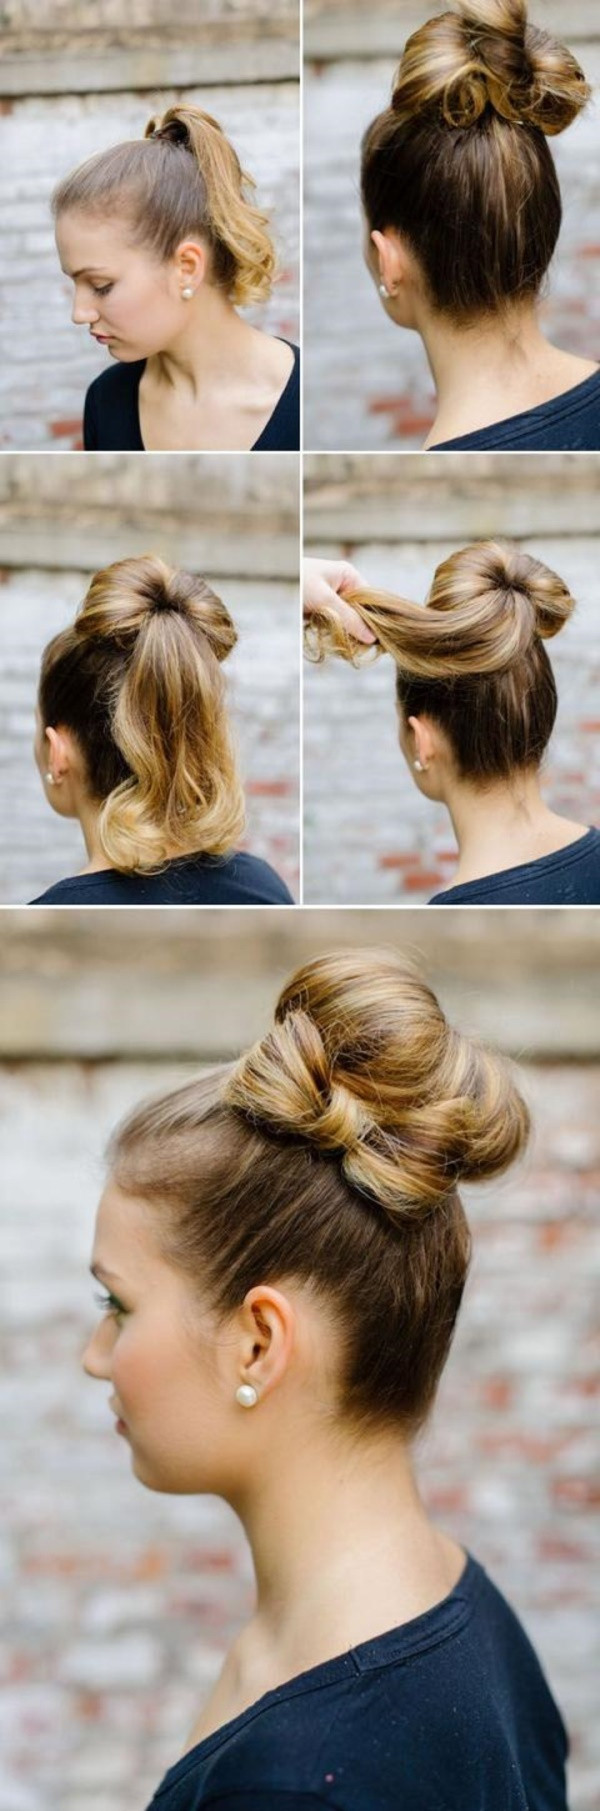 Easy DIY Updos For Long Hair
 101 Easy DIY Hairstyles for Medium and Long Hair to snatch